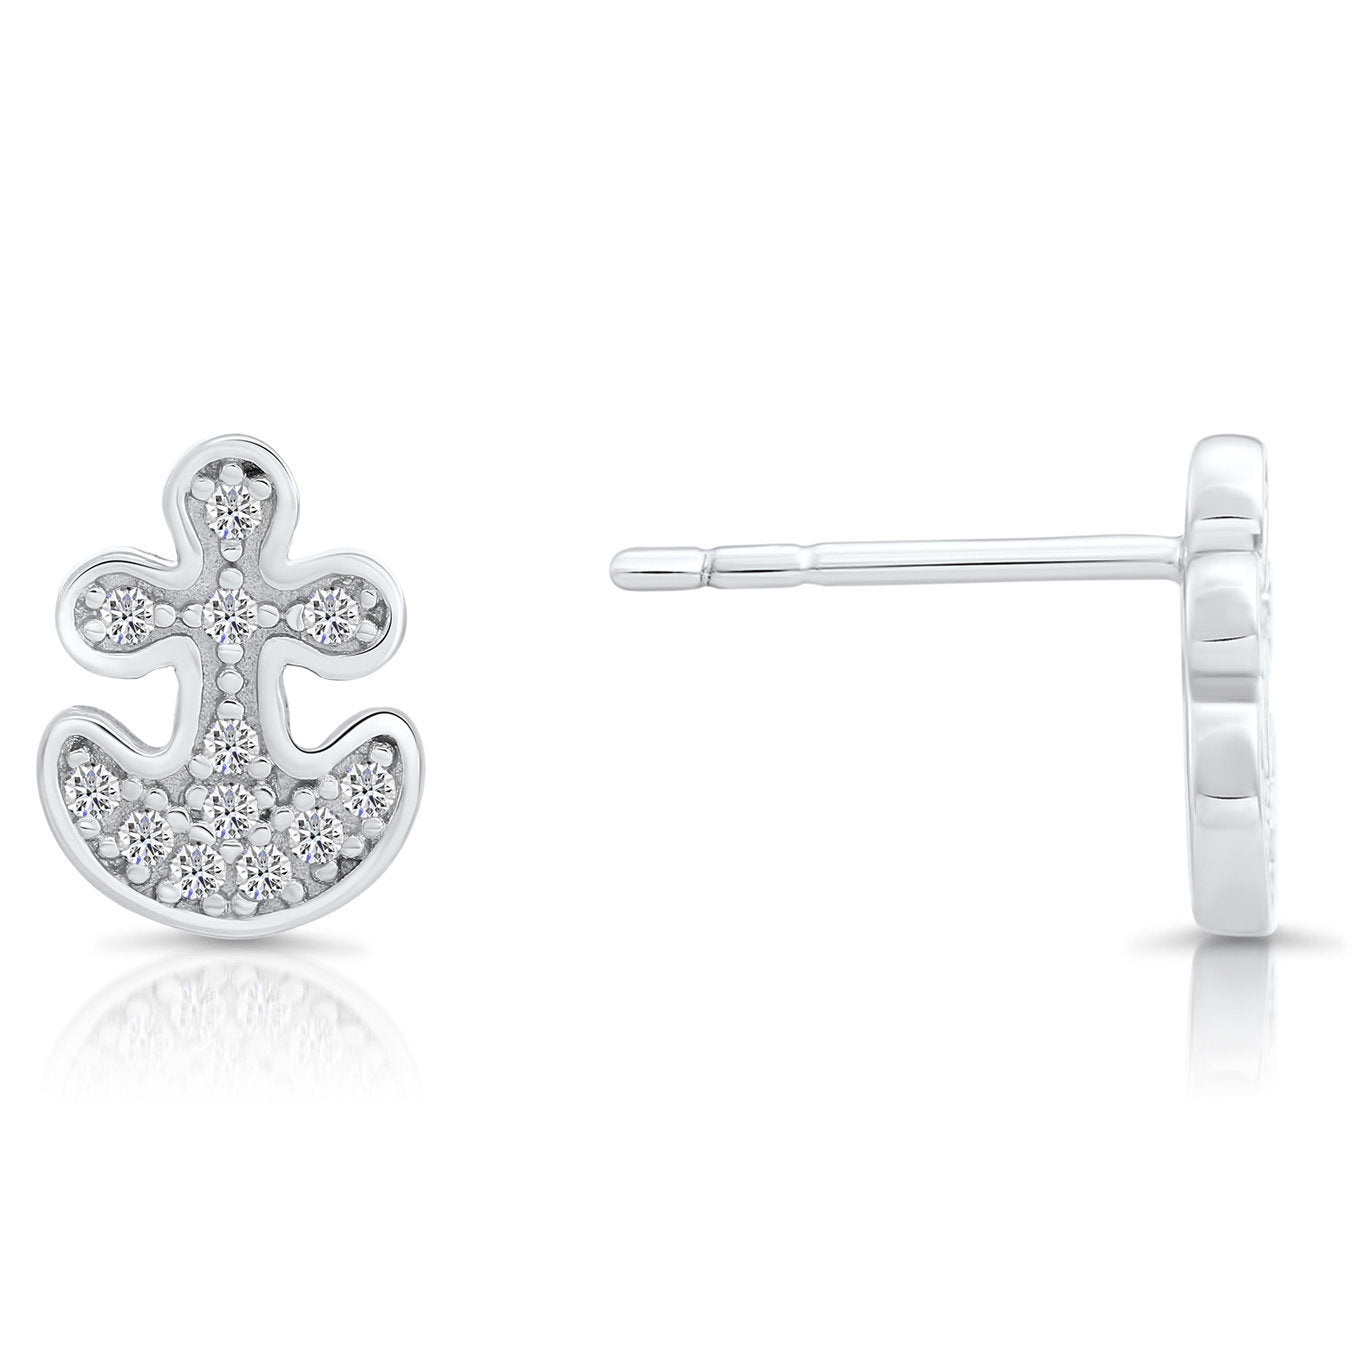 CZ Small Anchor Stud Earrings, 1659 in Sterling Silver